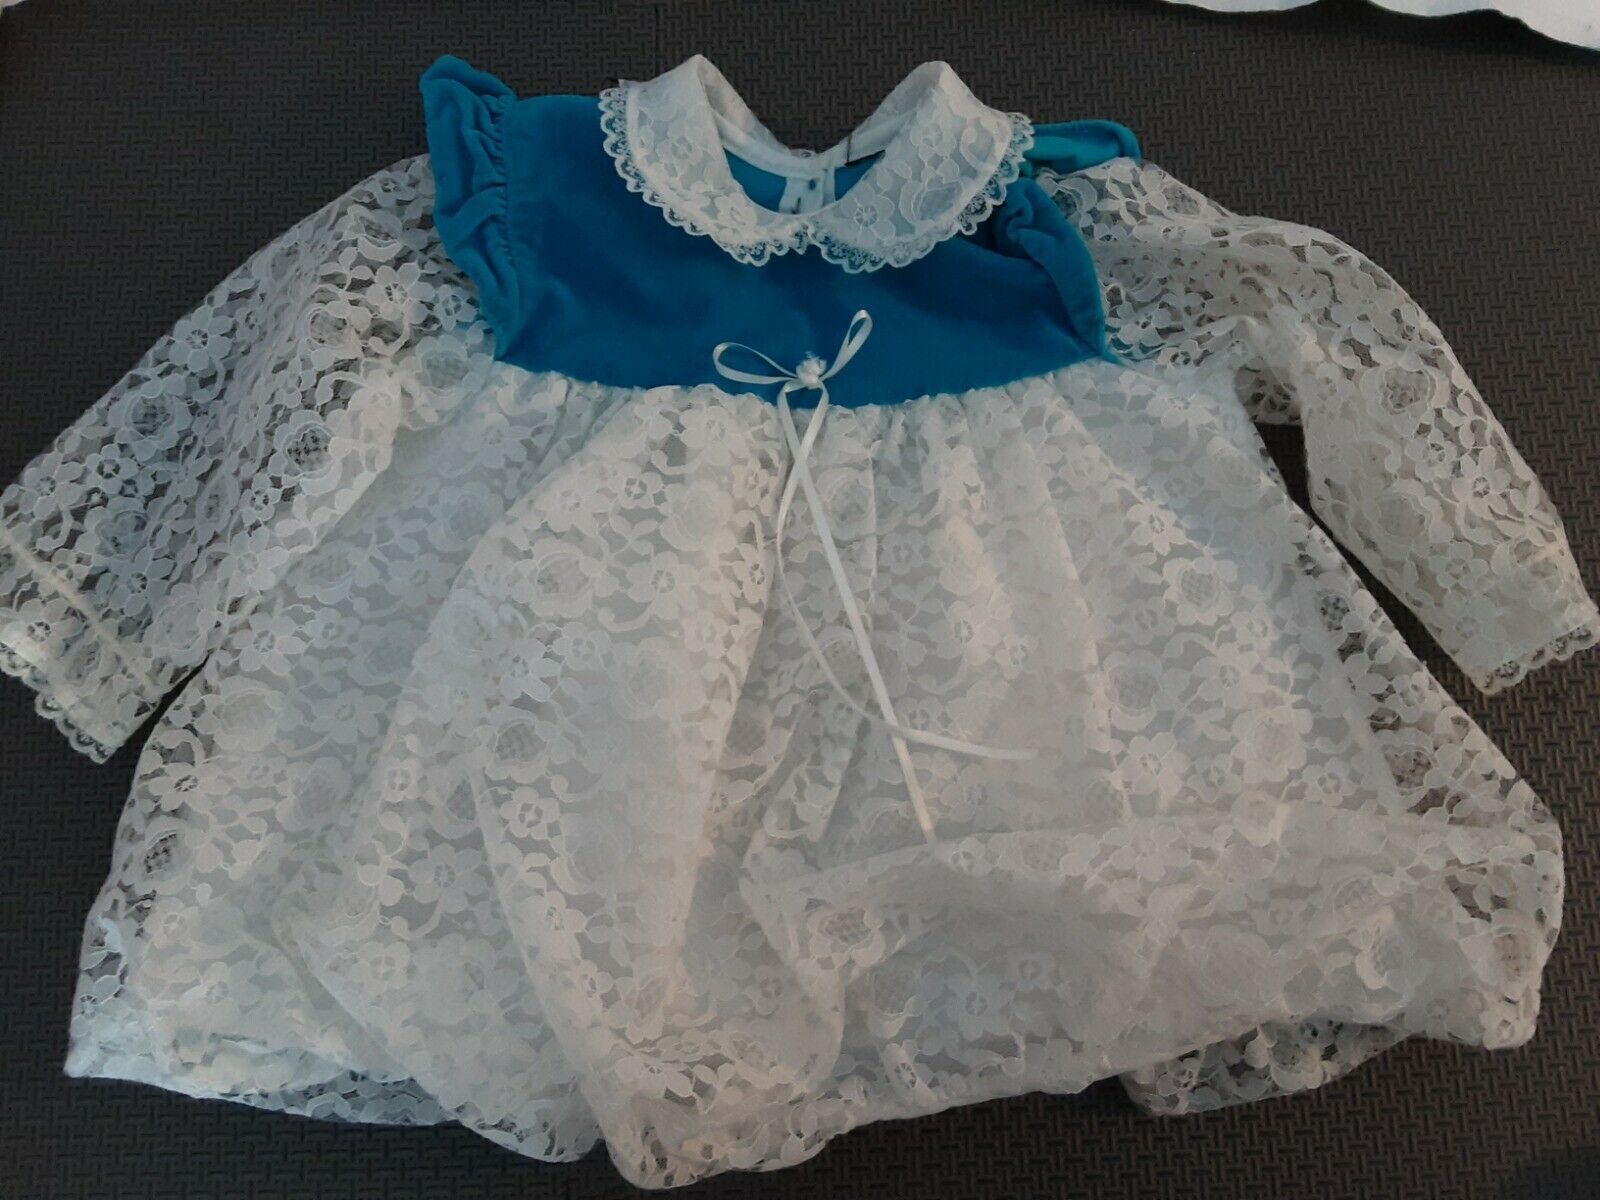 Vintage Doll Clothing Outfit For Reborn Doll Reborning Blue & Lace